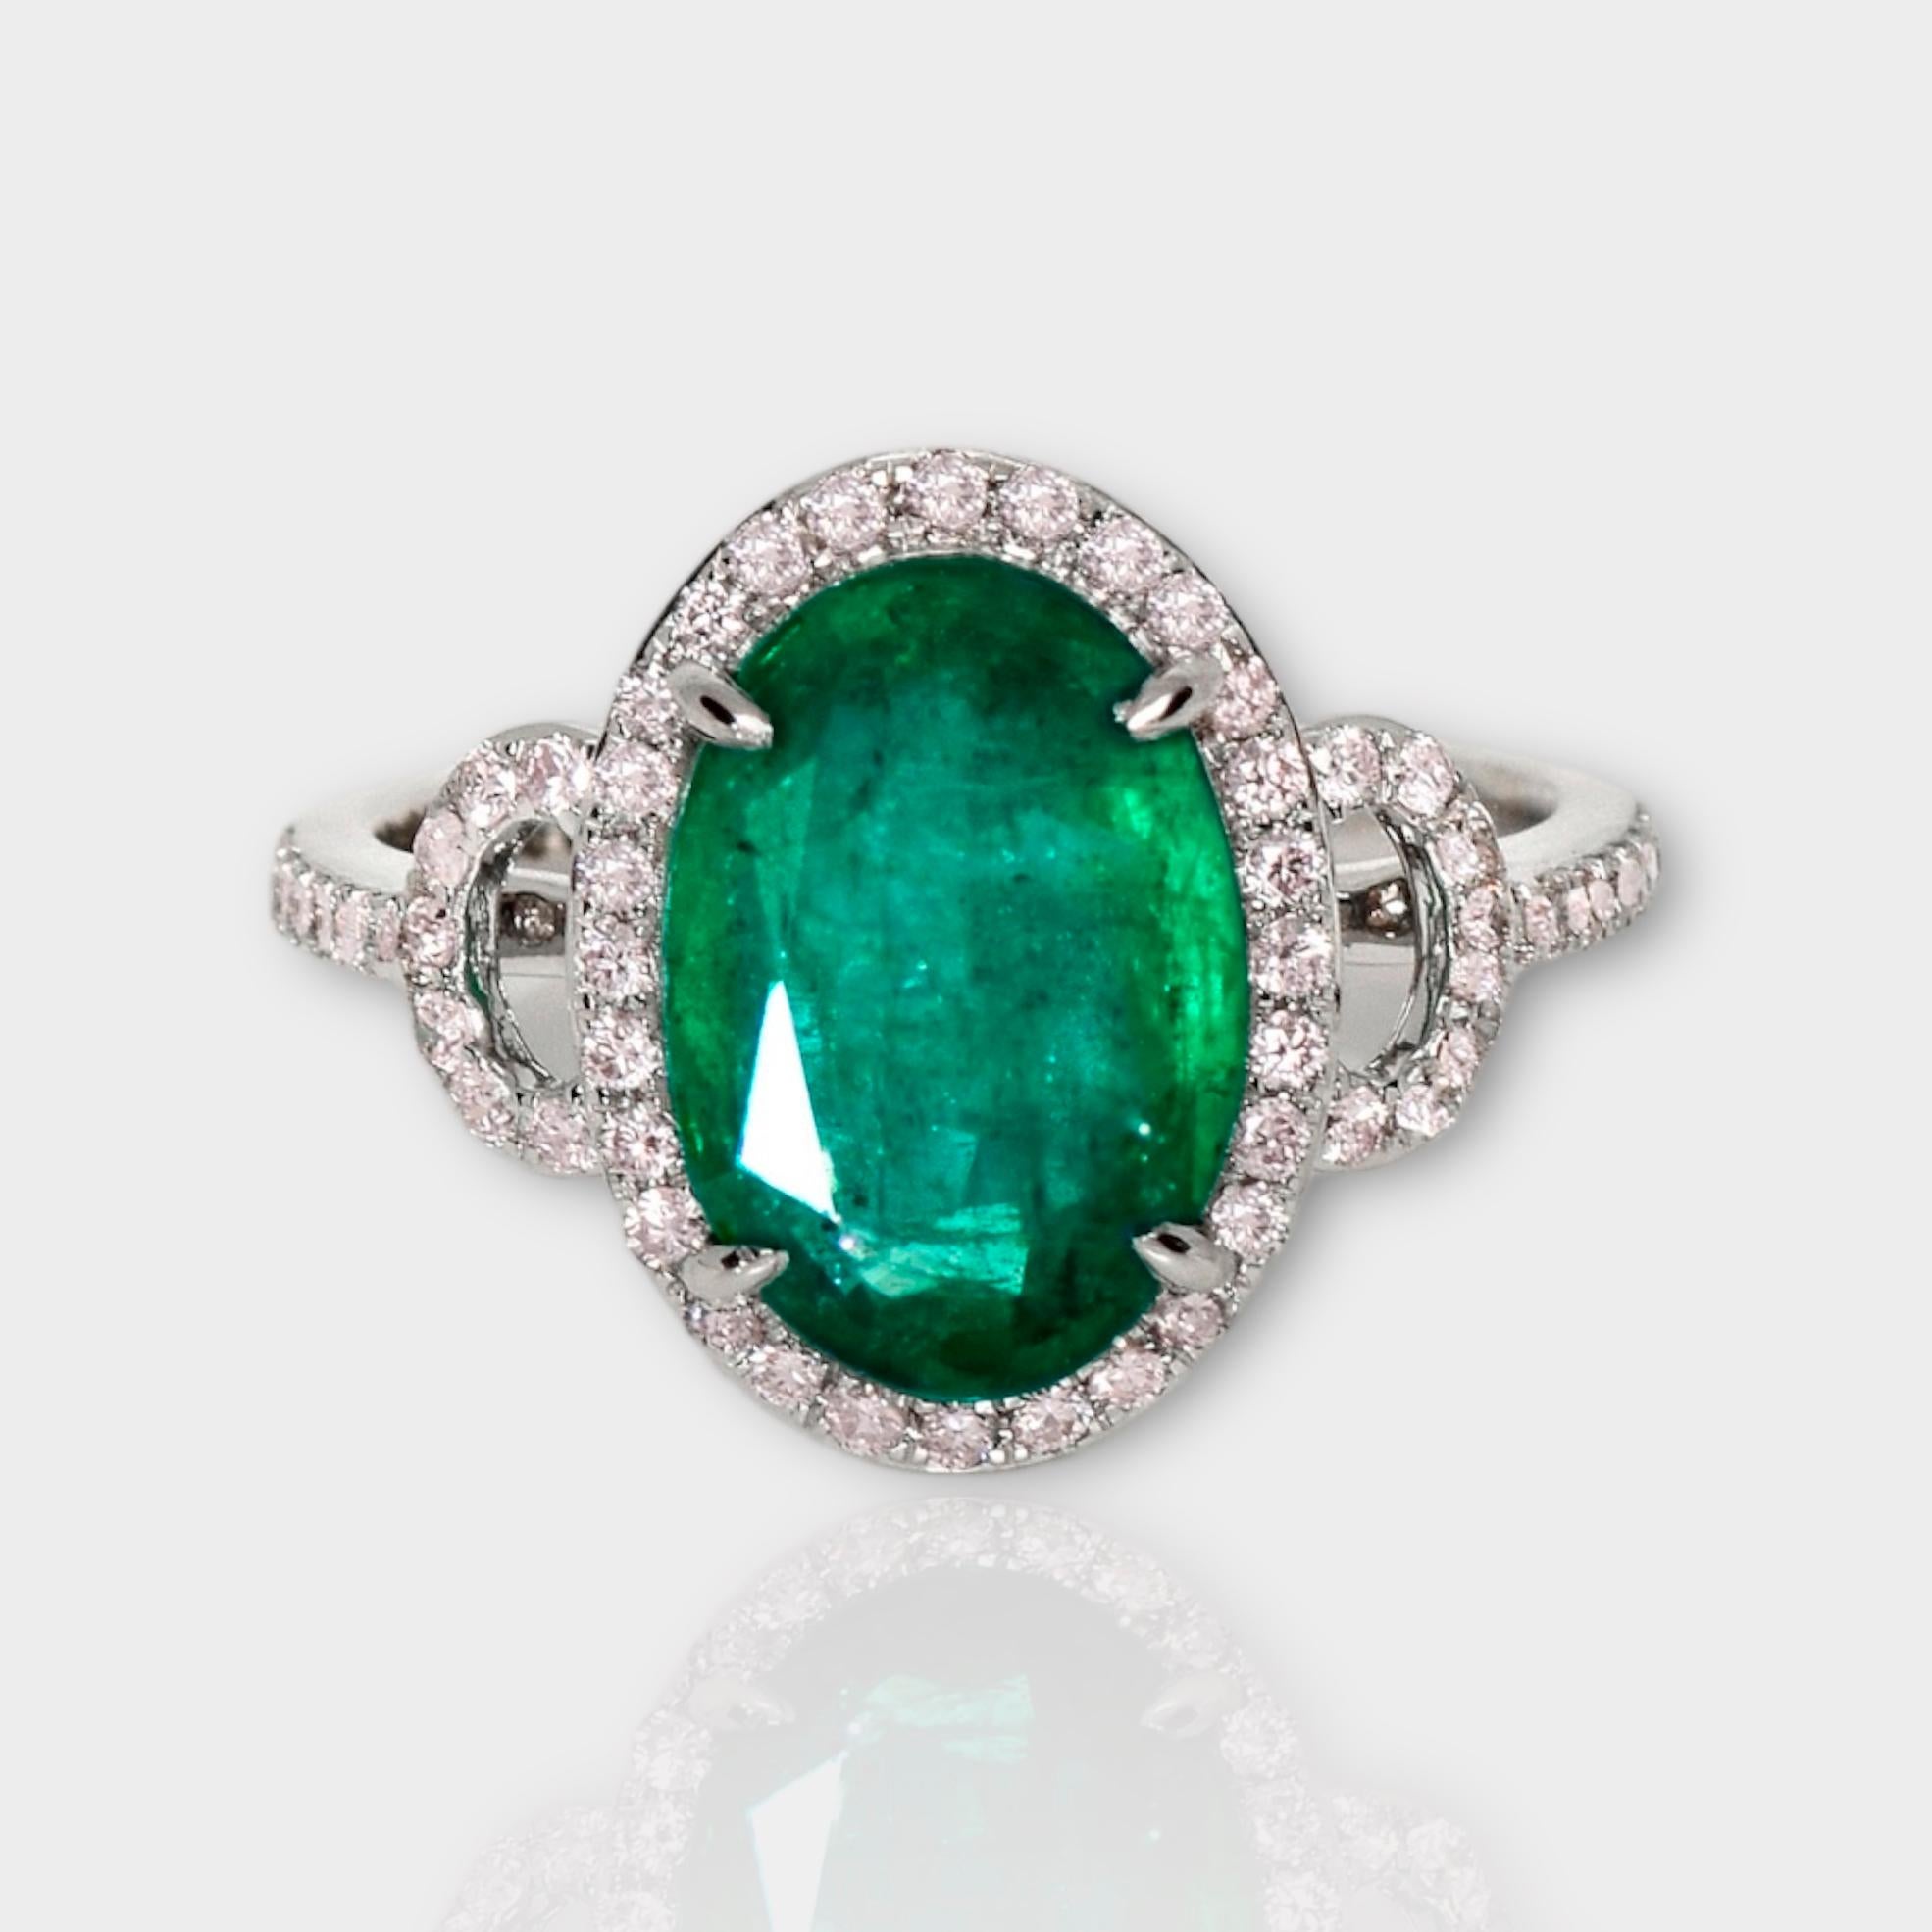 **IGI 18K White Gold 3.88 ct Emerald&Pink Diamonds Antique Art Deco Style Engagement Ring** 

An IGI-certified natural Zambia green emerald weighing 3.88 ct is set on an 18K white gold arc deco design band with natural pink diamonds weighing 0.45